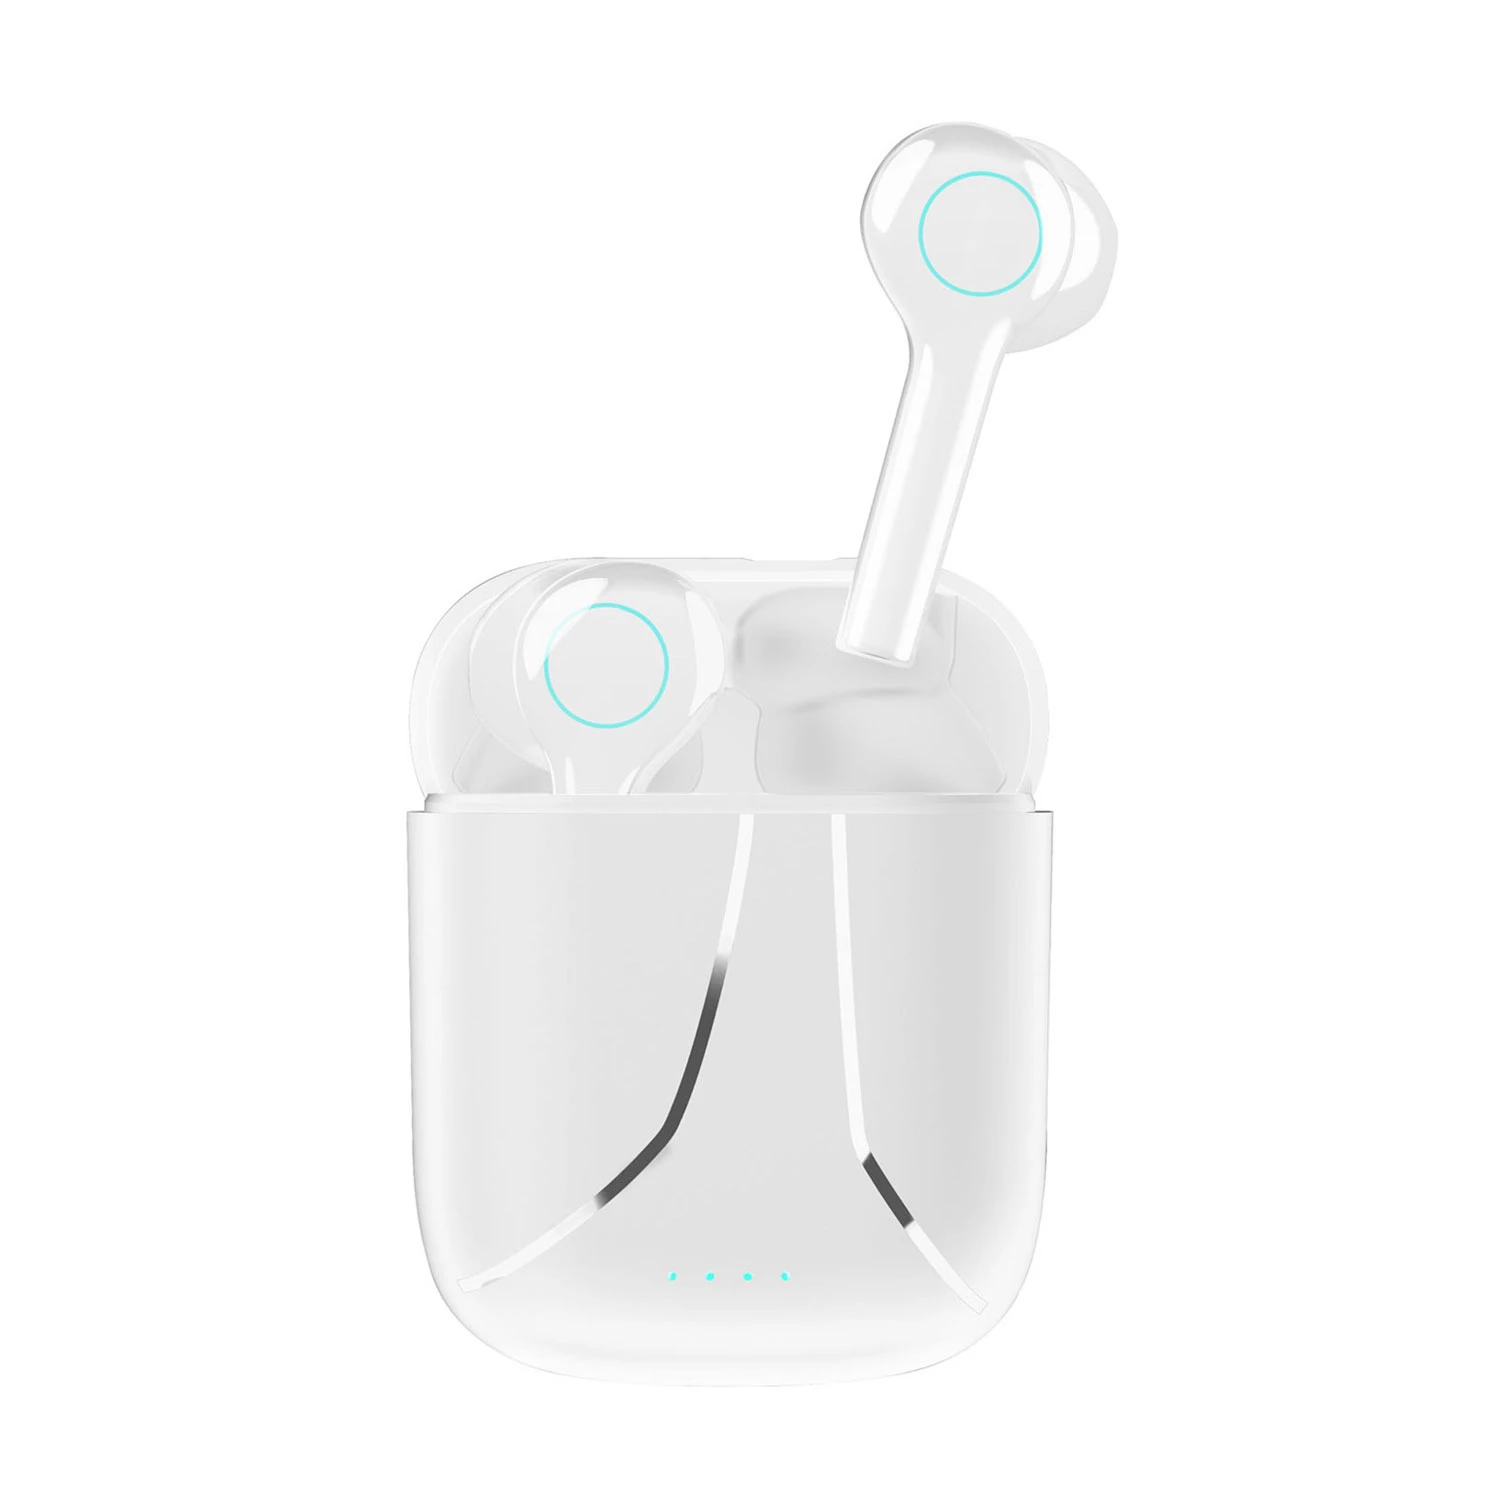 Wireless Earbuds V5.1 TWS Headsets with Touch Control, LED Display, Magnetic Charging Case, Mic - In